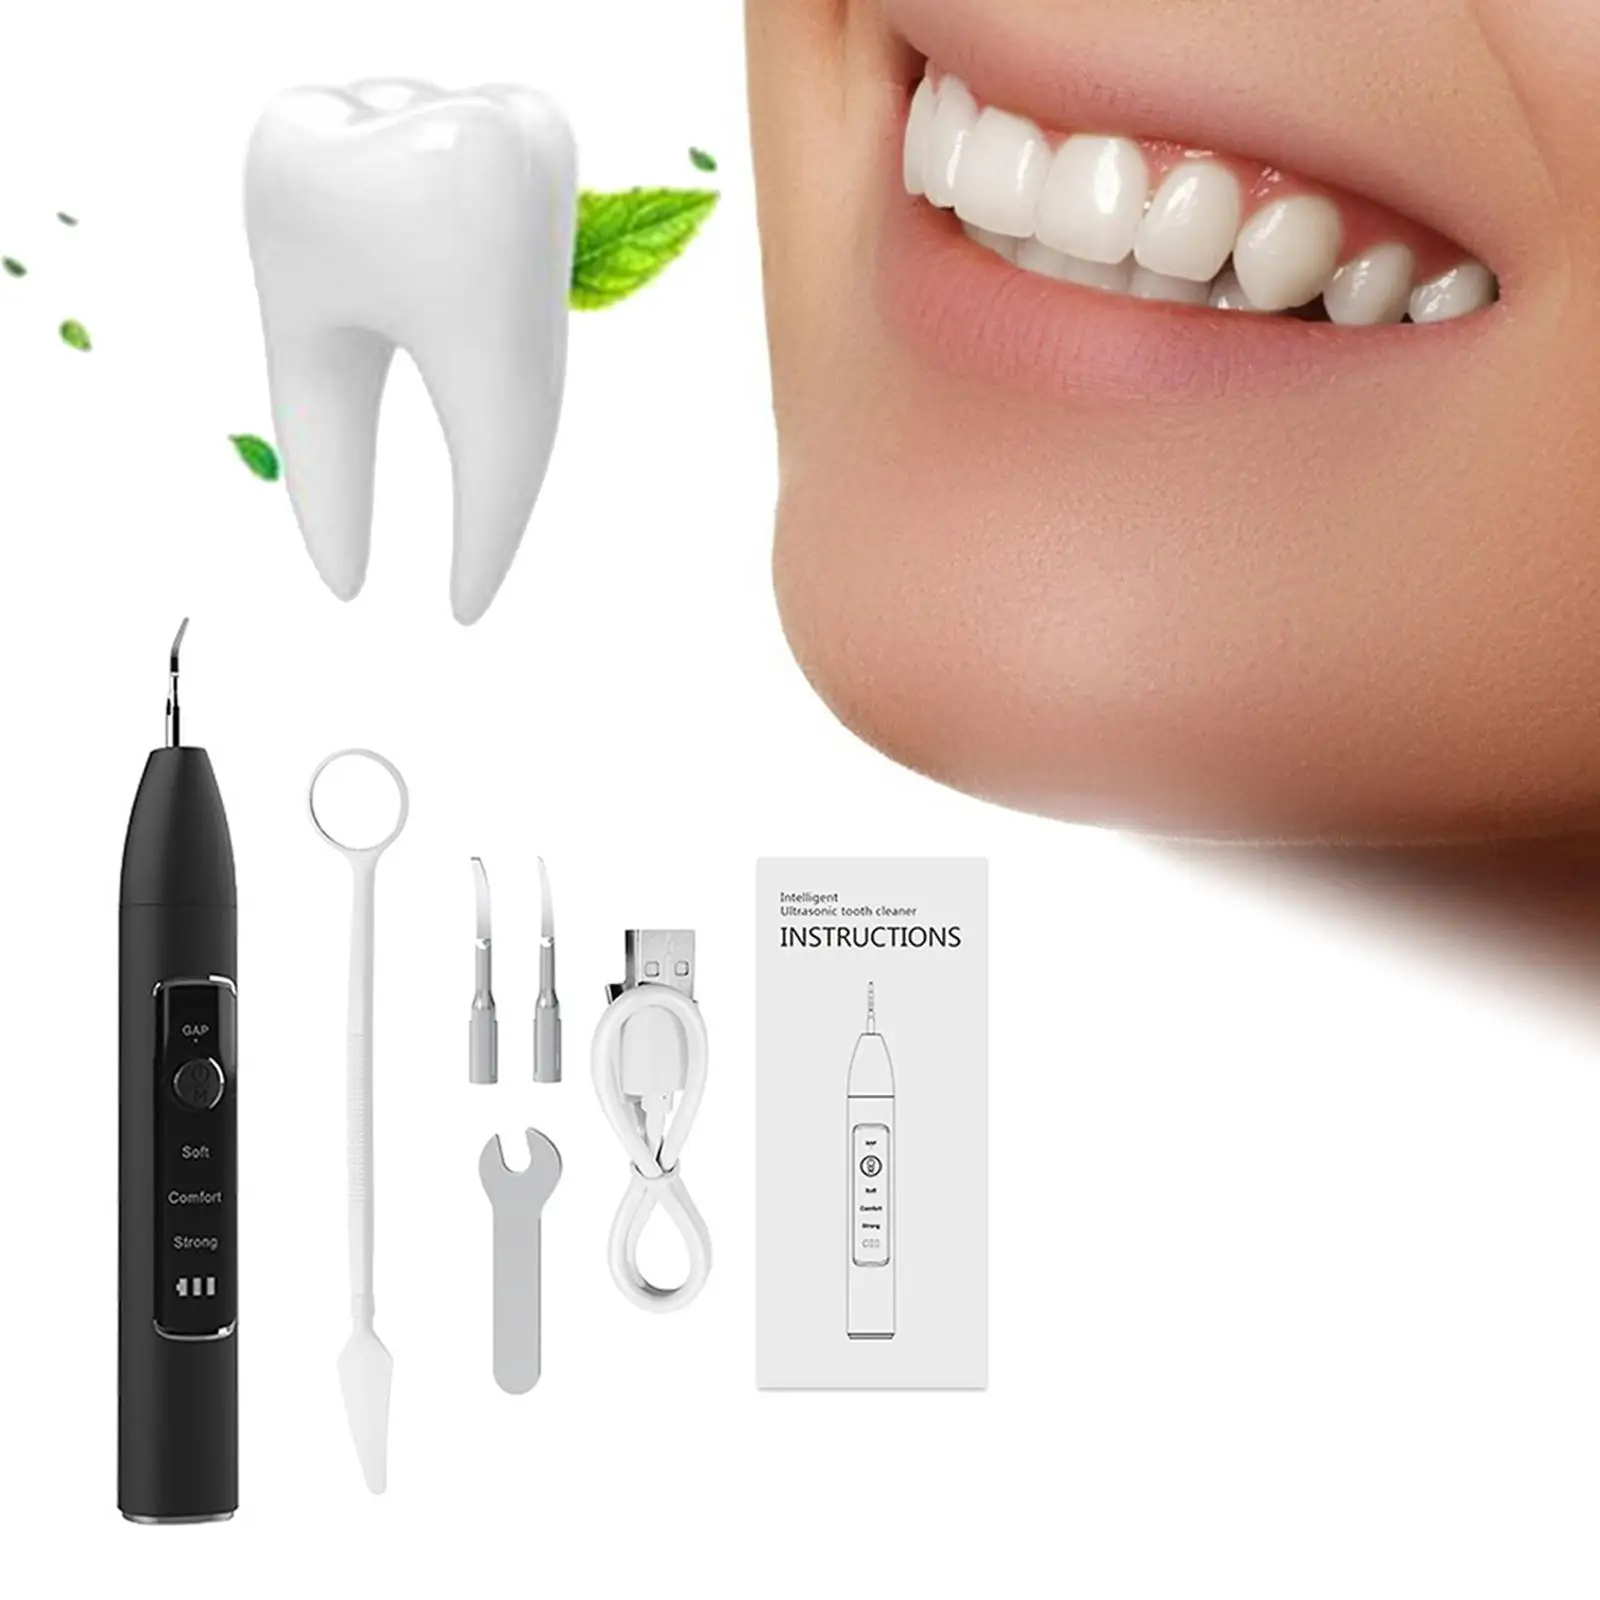 Teeth Cleaner Power Off Protection Portable Teeth Cleaning Set for Beginners